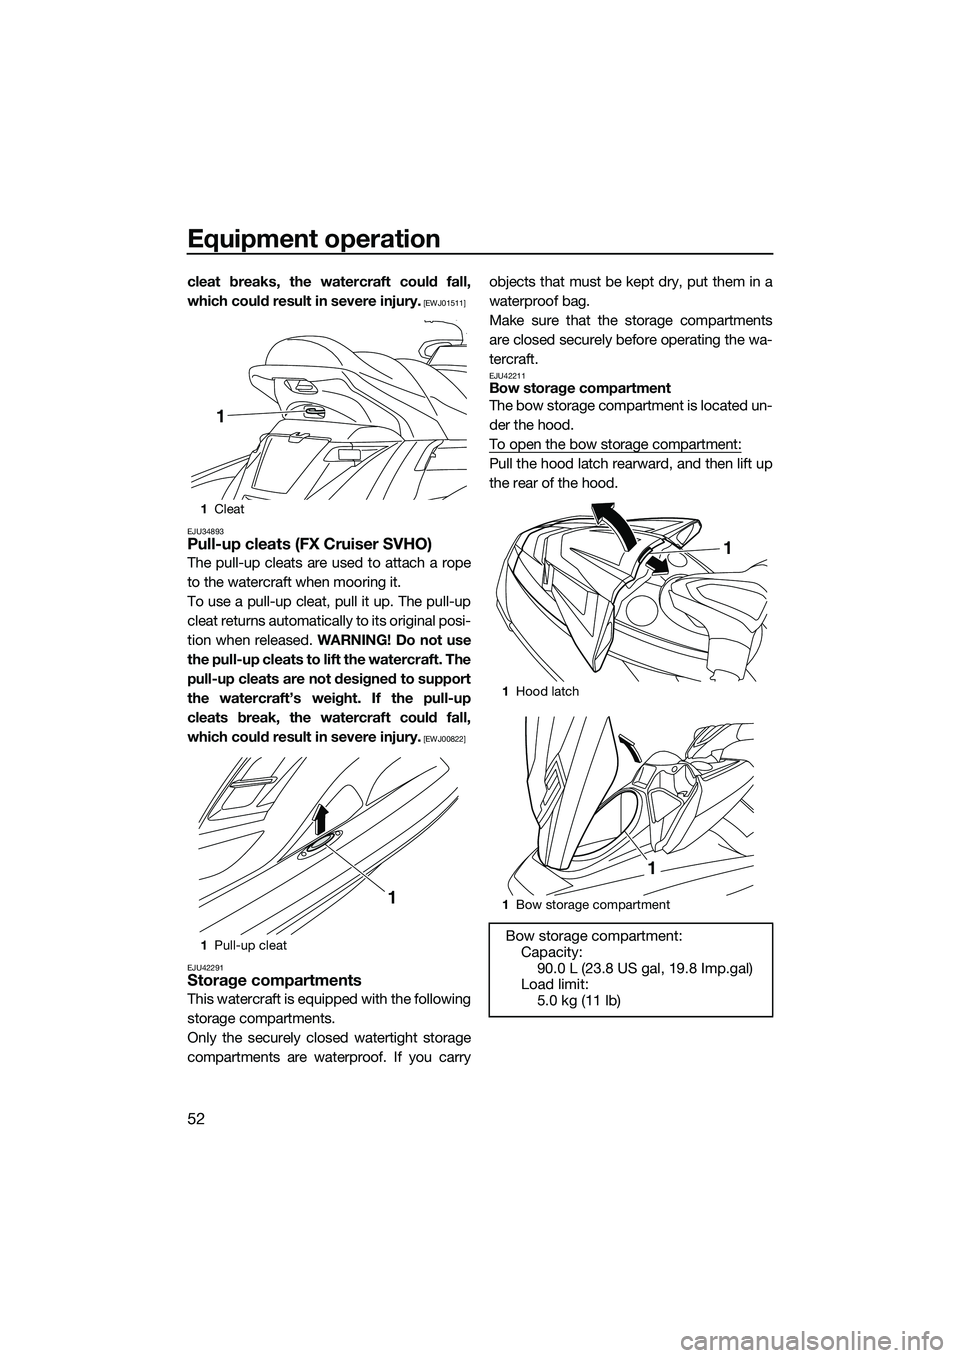 YAMAHA FX SVHO 2014  Owners Manual Equipment operation
52
cleat breaks, the watercraft could fall,
which could result in severe injury.
 [EWJ01511]
EJU34893
Pull-up cleats (FX Cruiser SVHO)
The pull-up cleats are used to attach a rope
